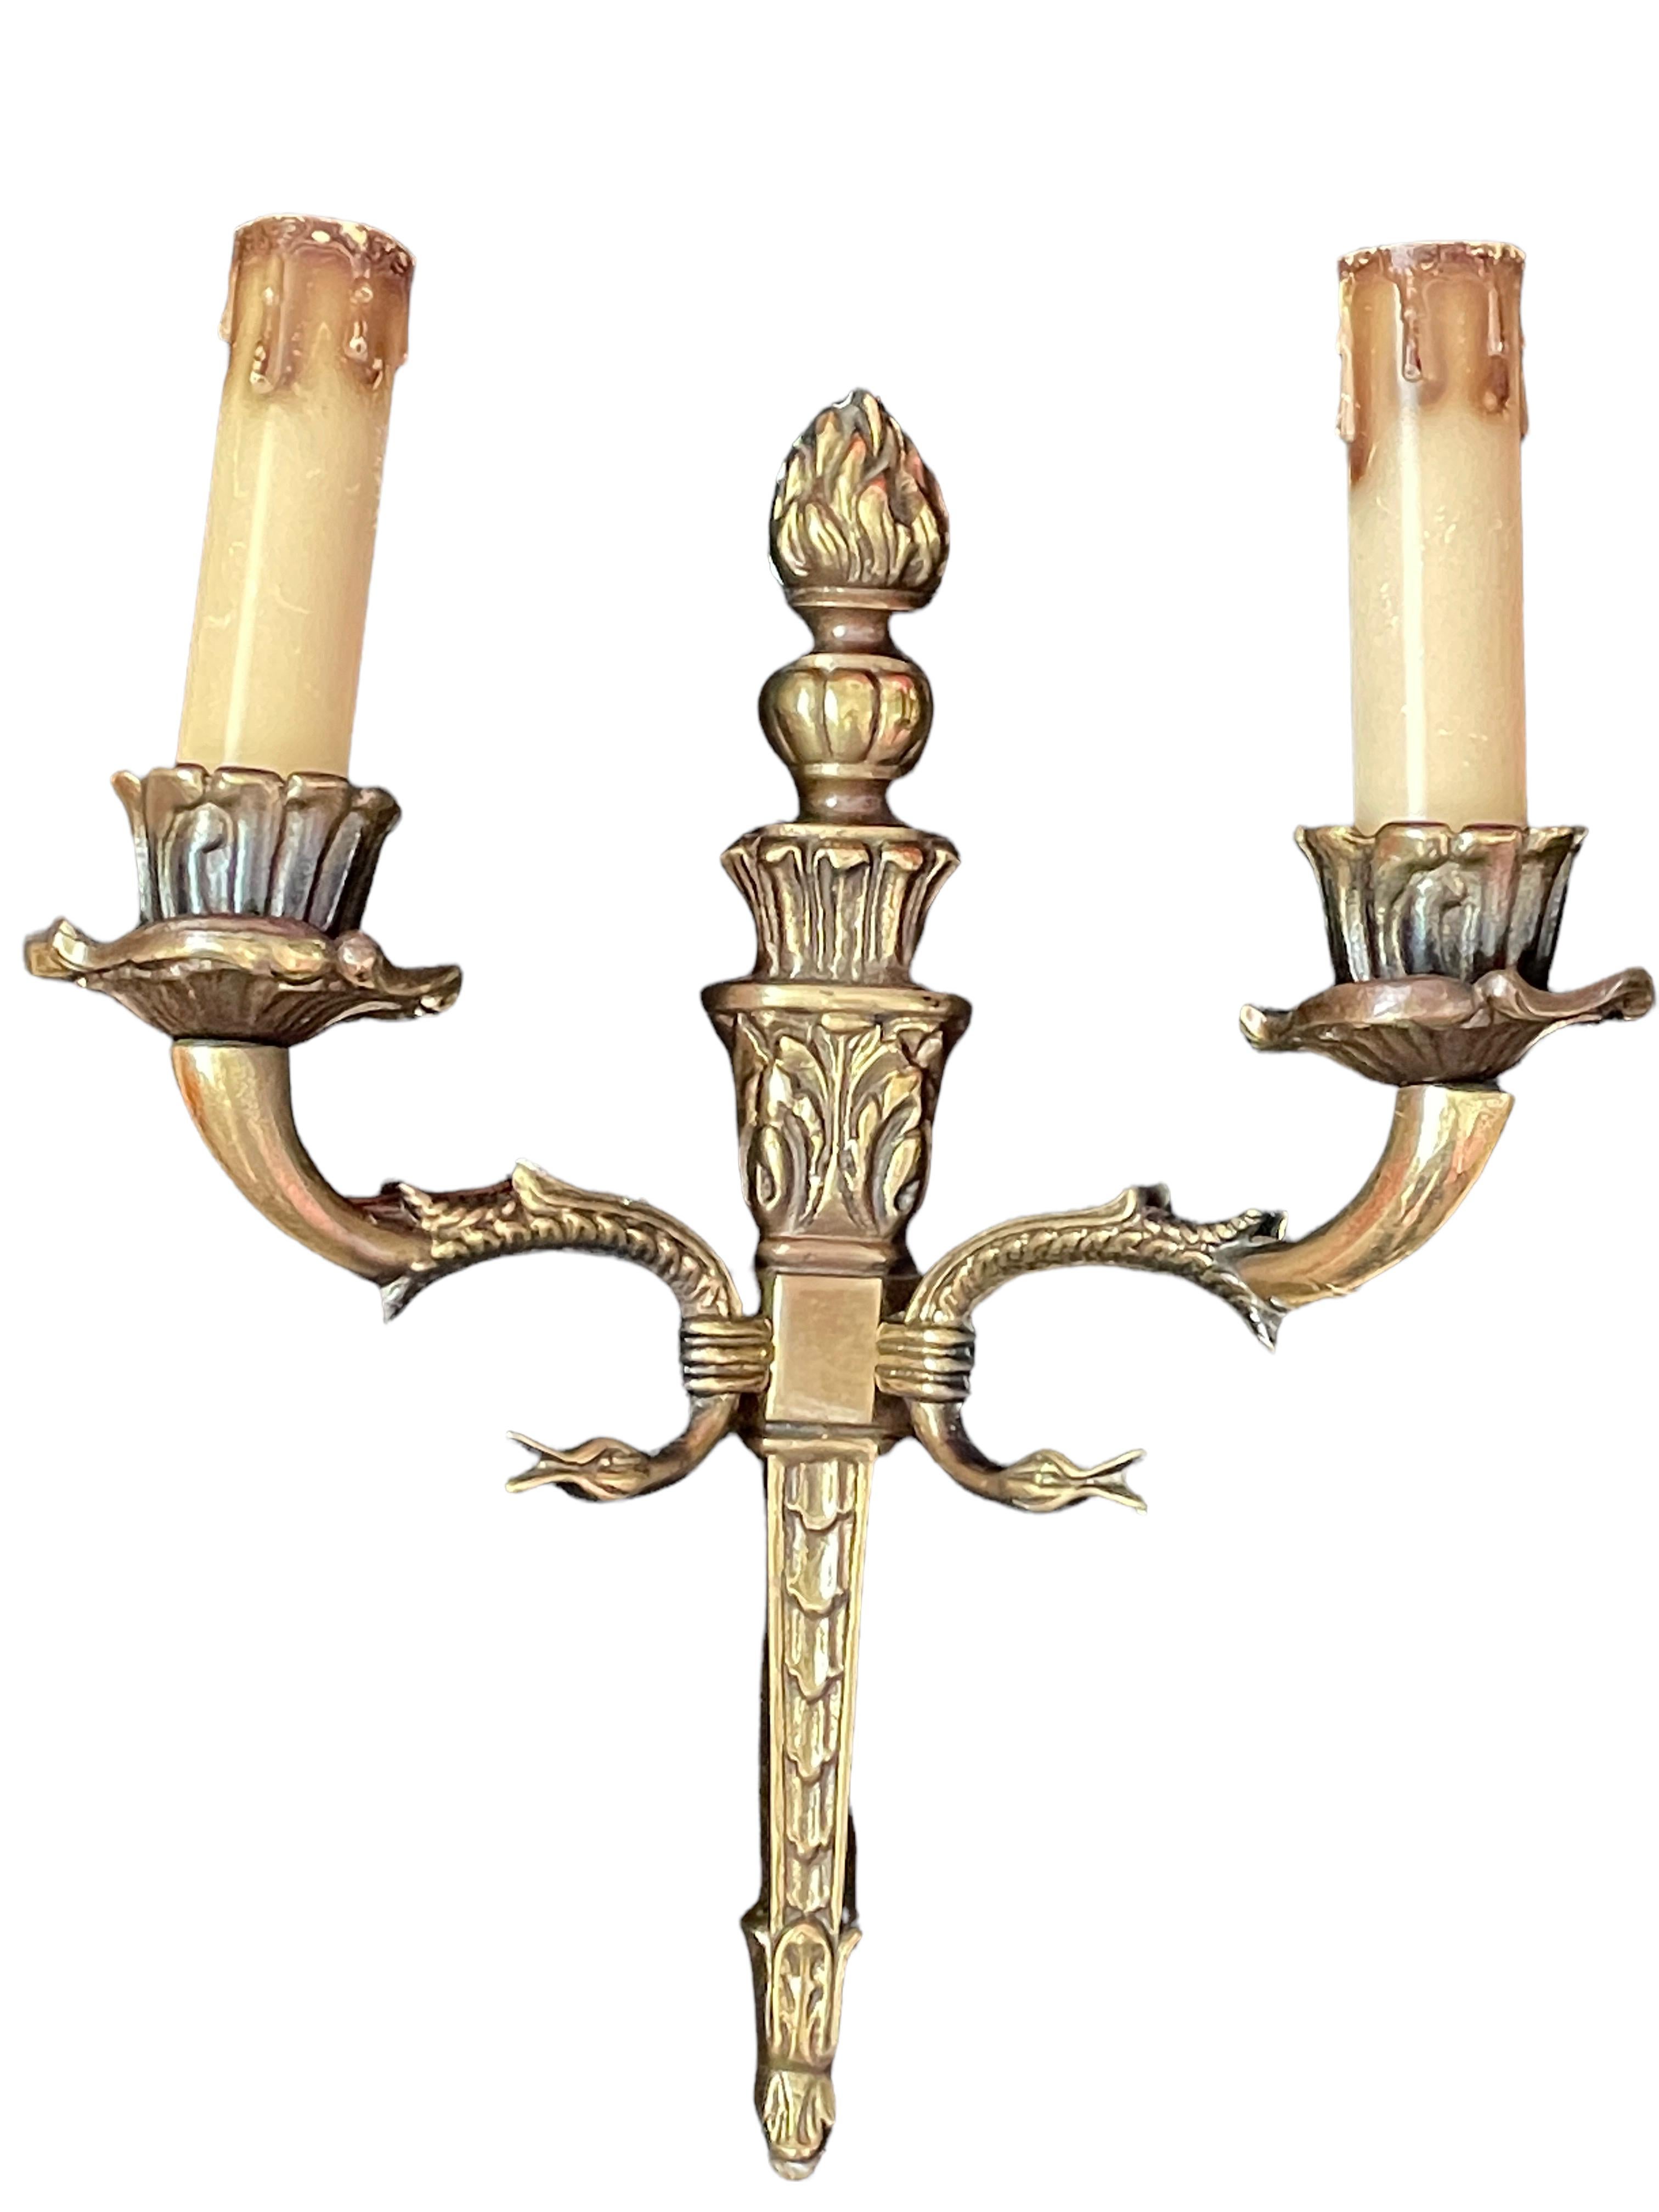 Pair of nice Sconces. Each fixture requires two European E14 candelabras bulbs, each bulb up to 40 watts. The wall lights have a beautiful patina and gives each room an eclectic statement. Made of bronze metal. Nice addition to any room.